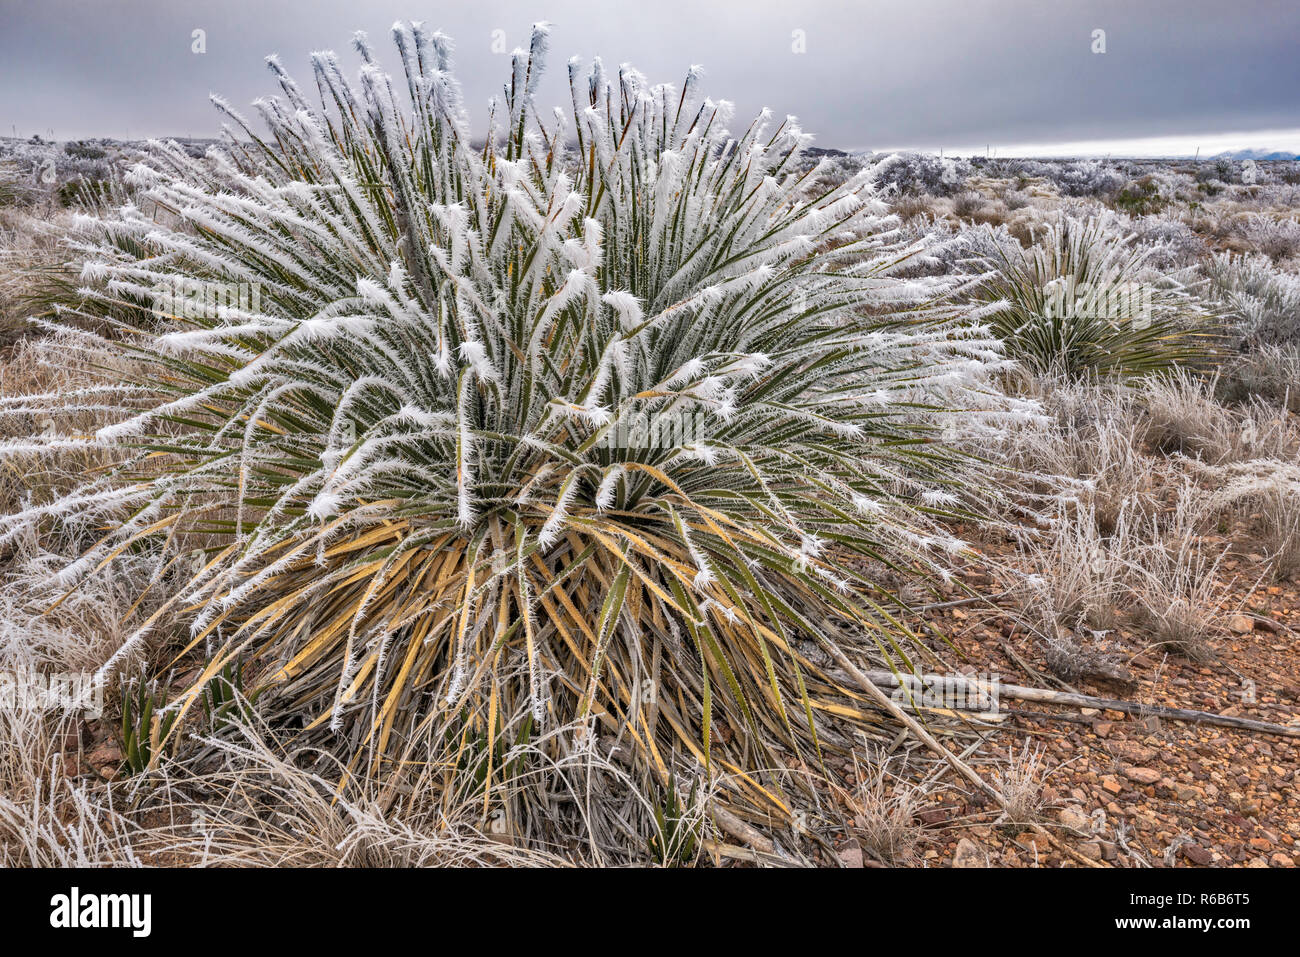 Sotol covered with frozen fog aka atmospheric icing in winter, Chihuahuan Desert, Big Bend National Park, Texas, USA Stock Photo